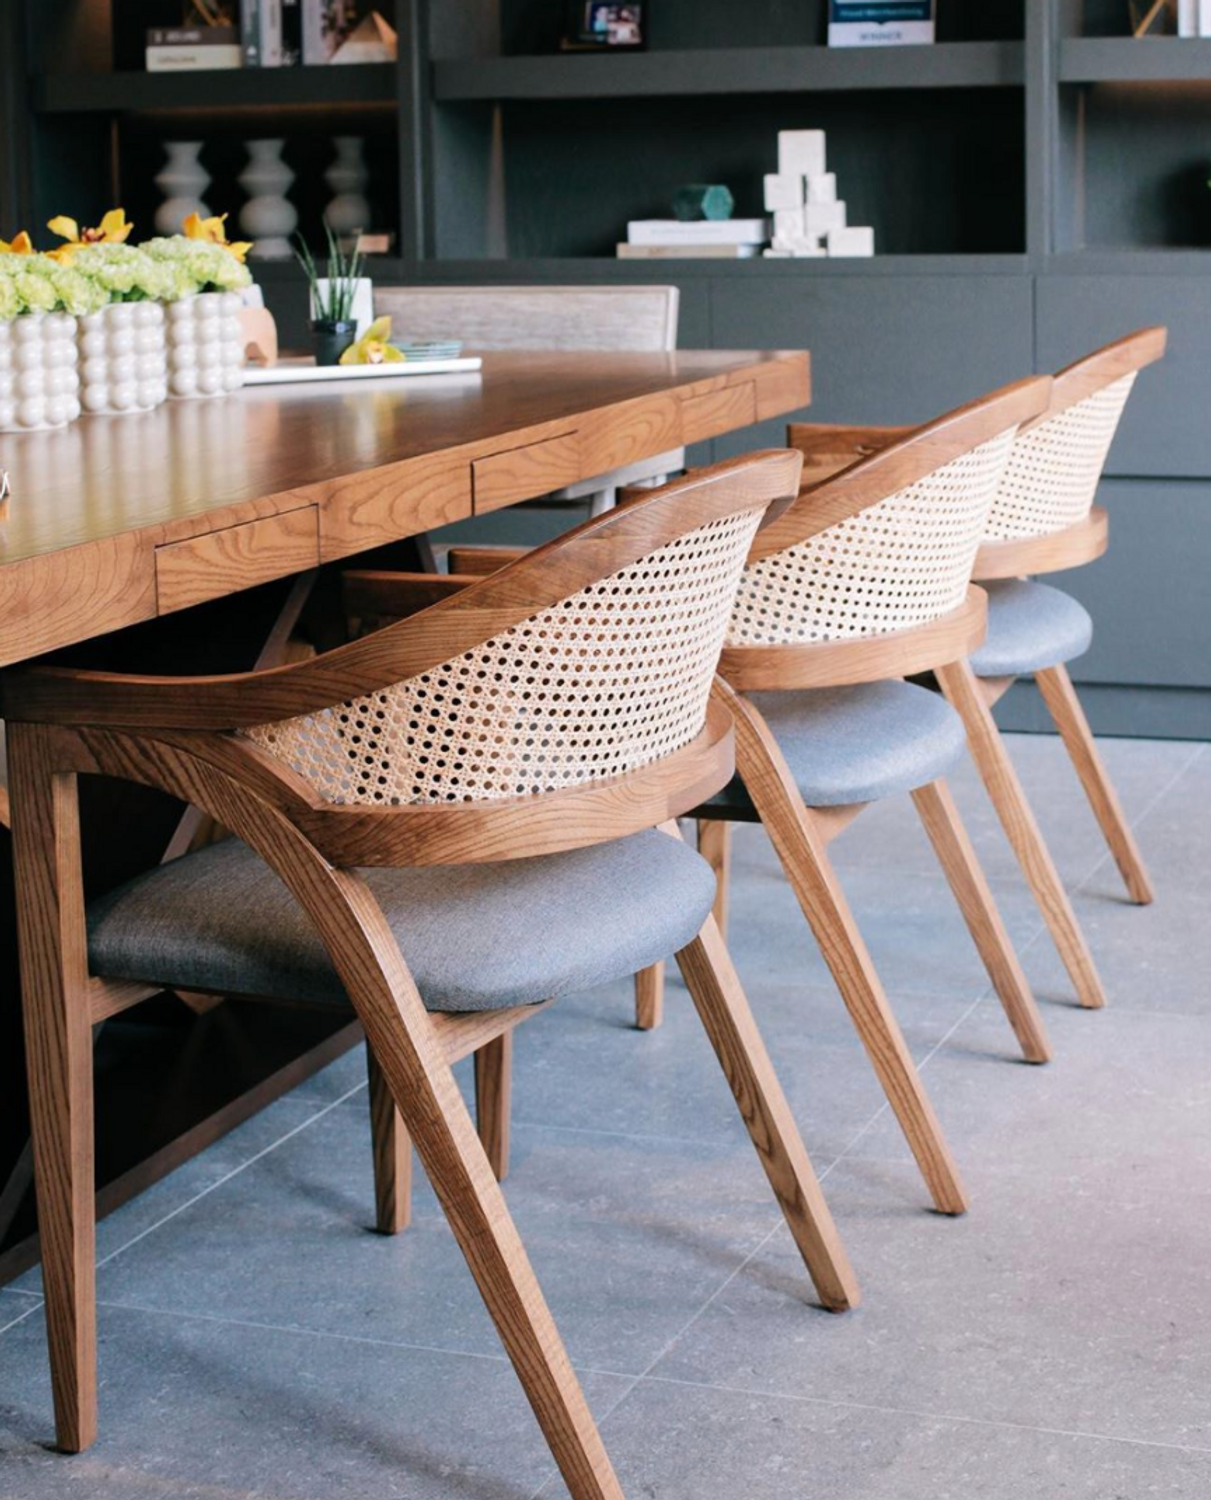 The Timeless Elegance of Rattan Chairs: A
Complete Guide